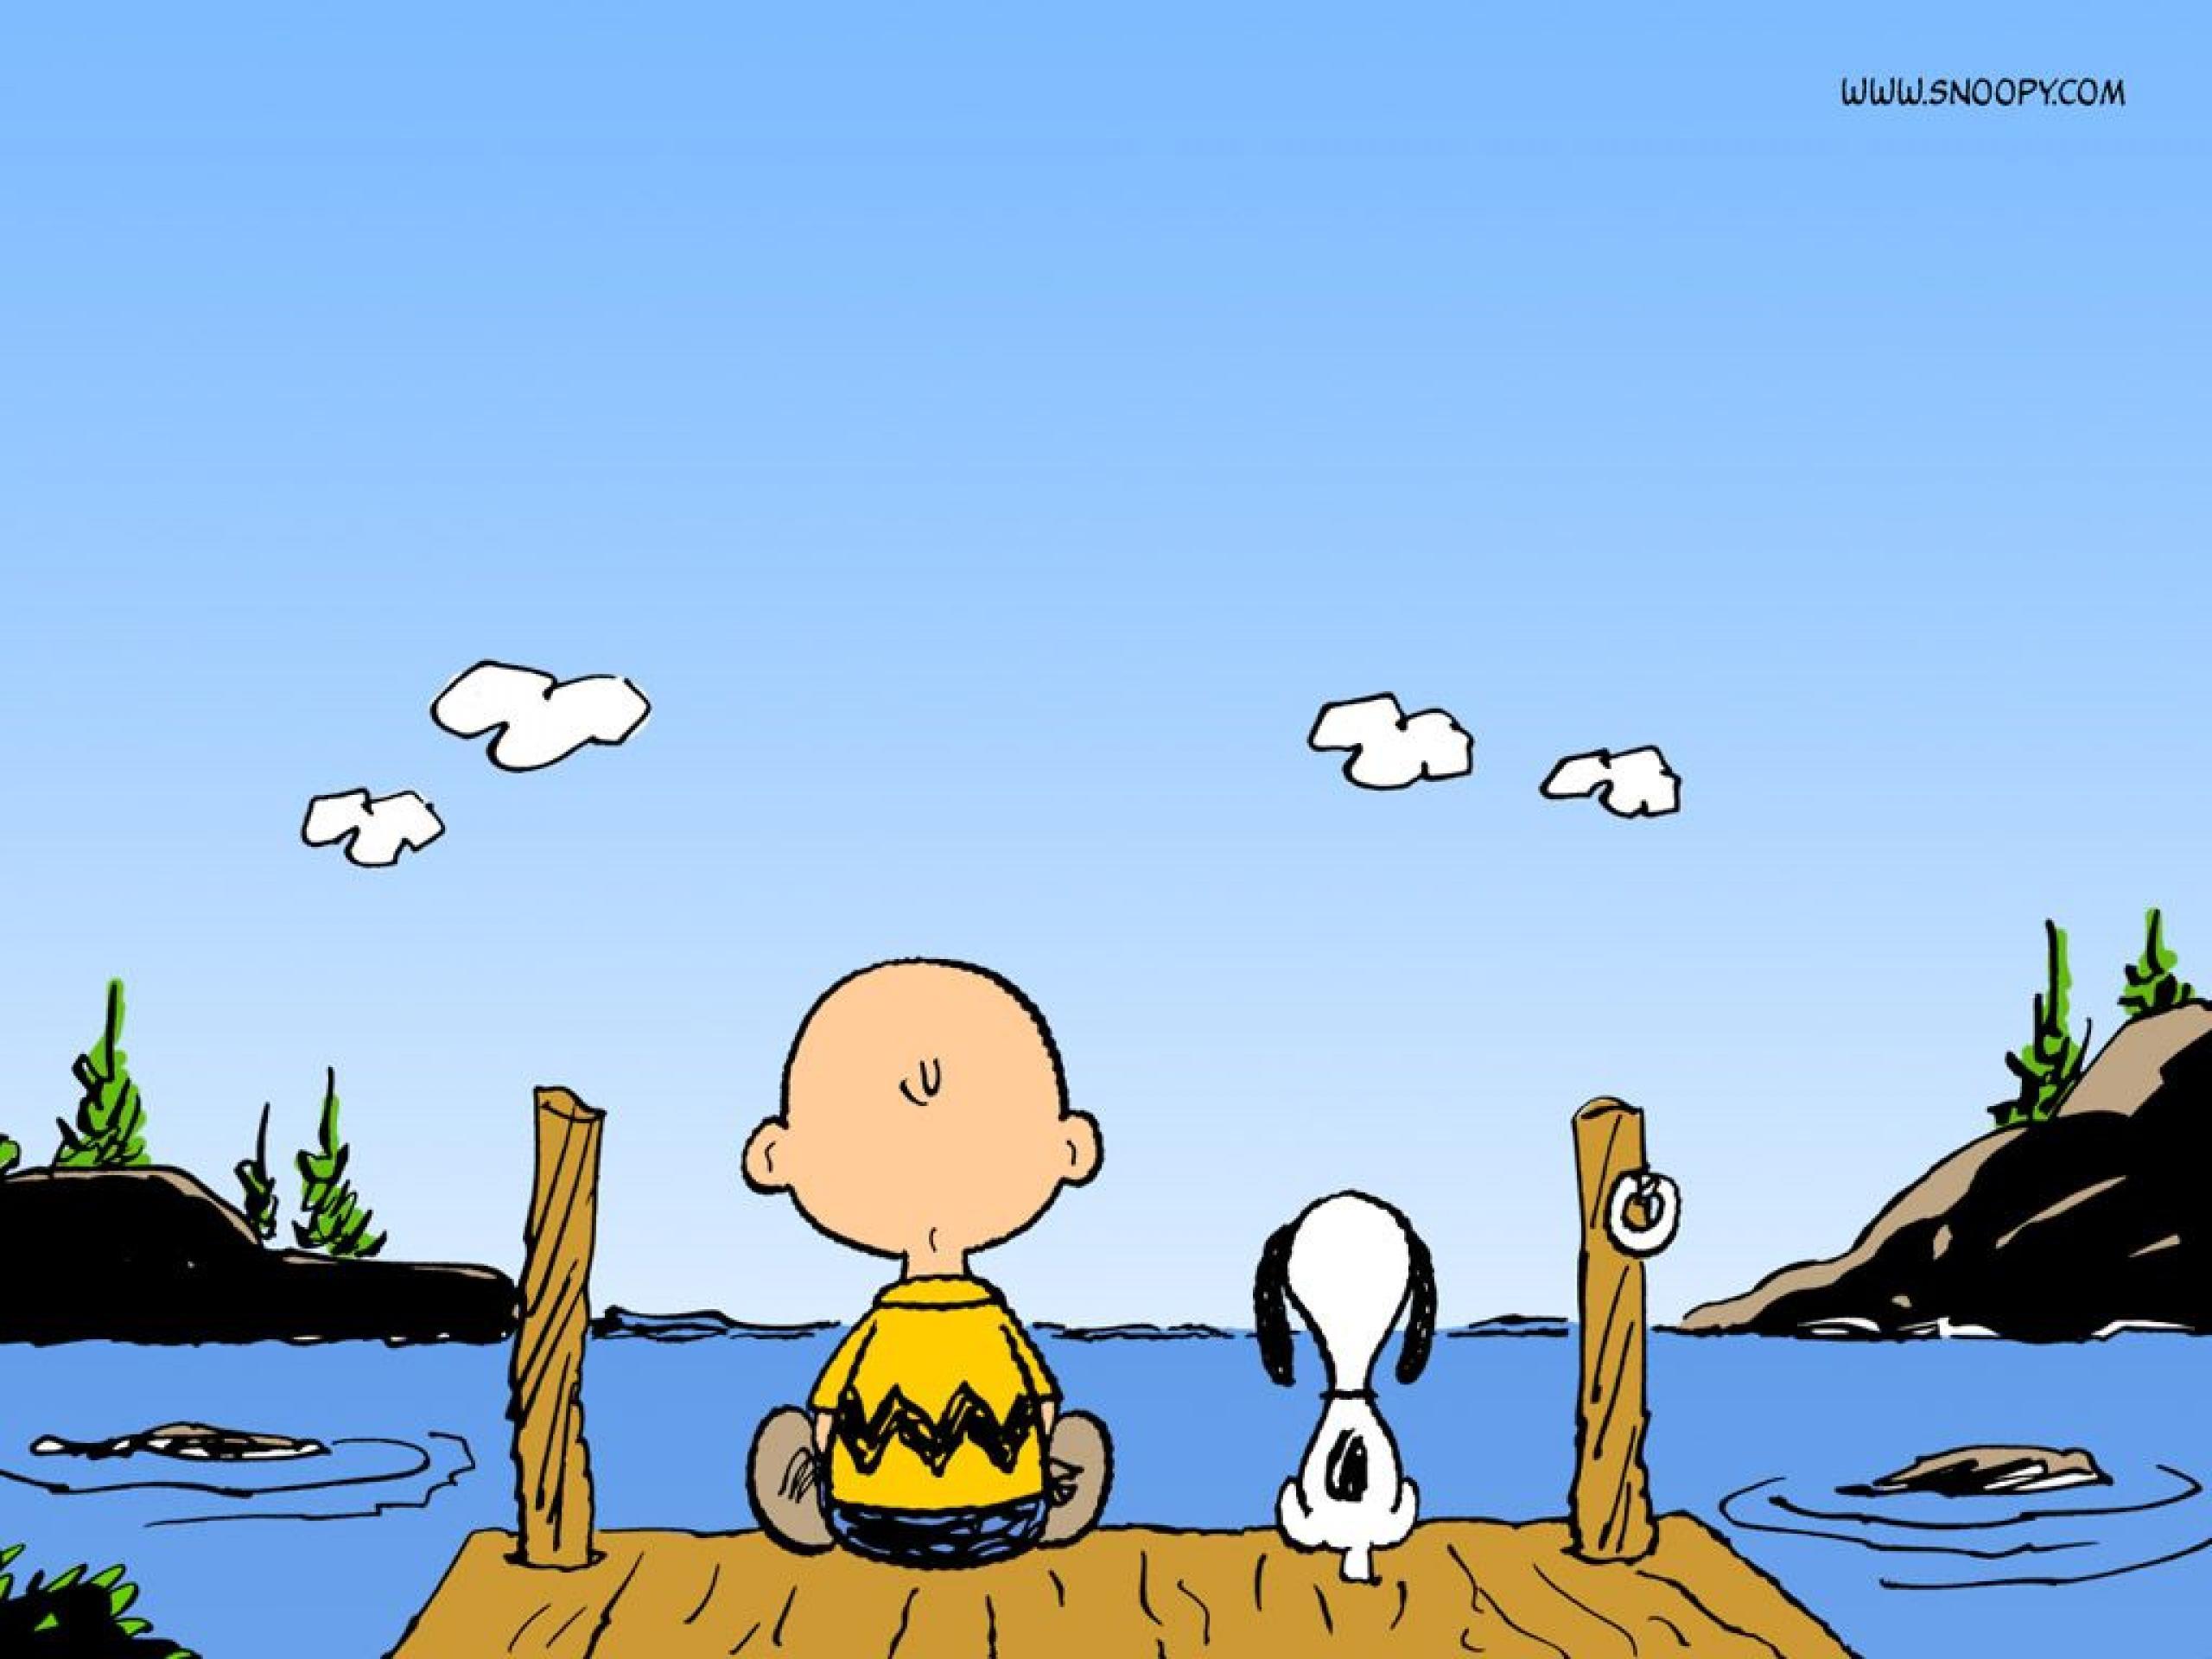 Snoopy Summer Wallpapers Top Free Snoopy Summer Backgrounds Wallpaperaccess